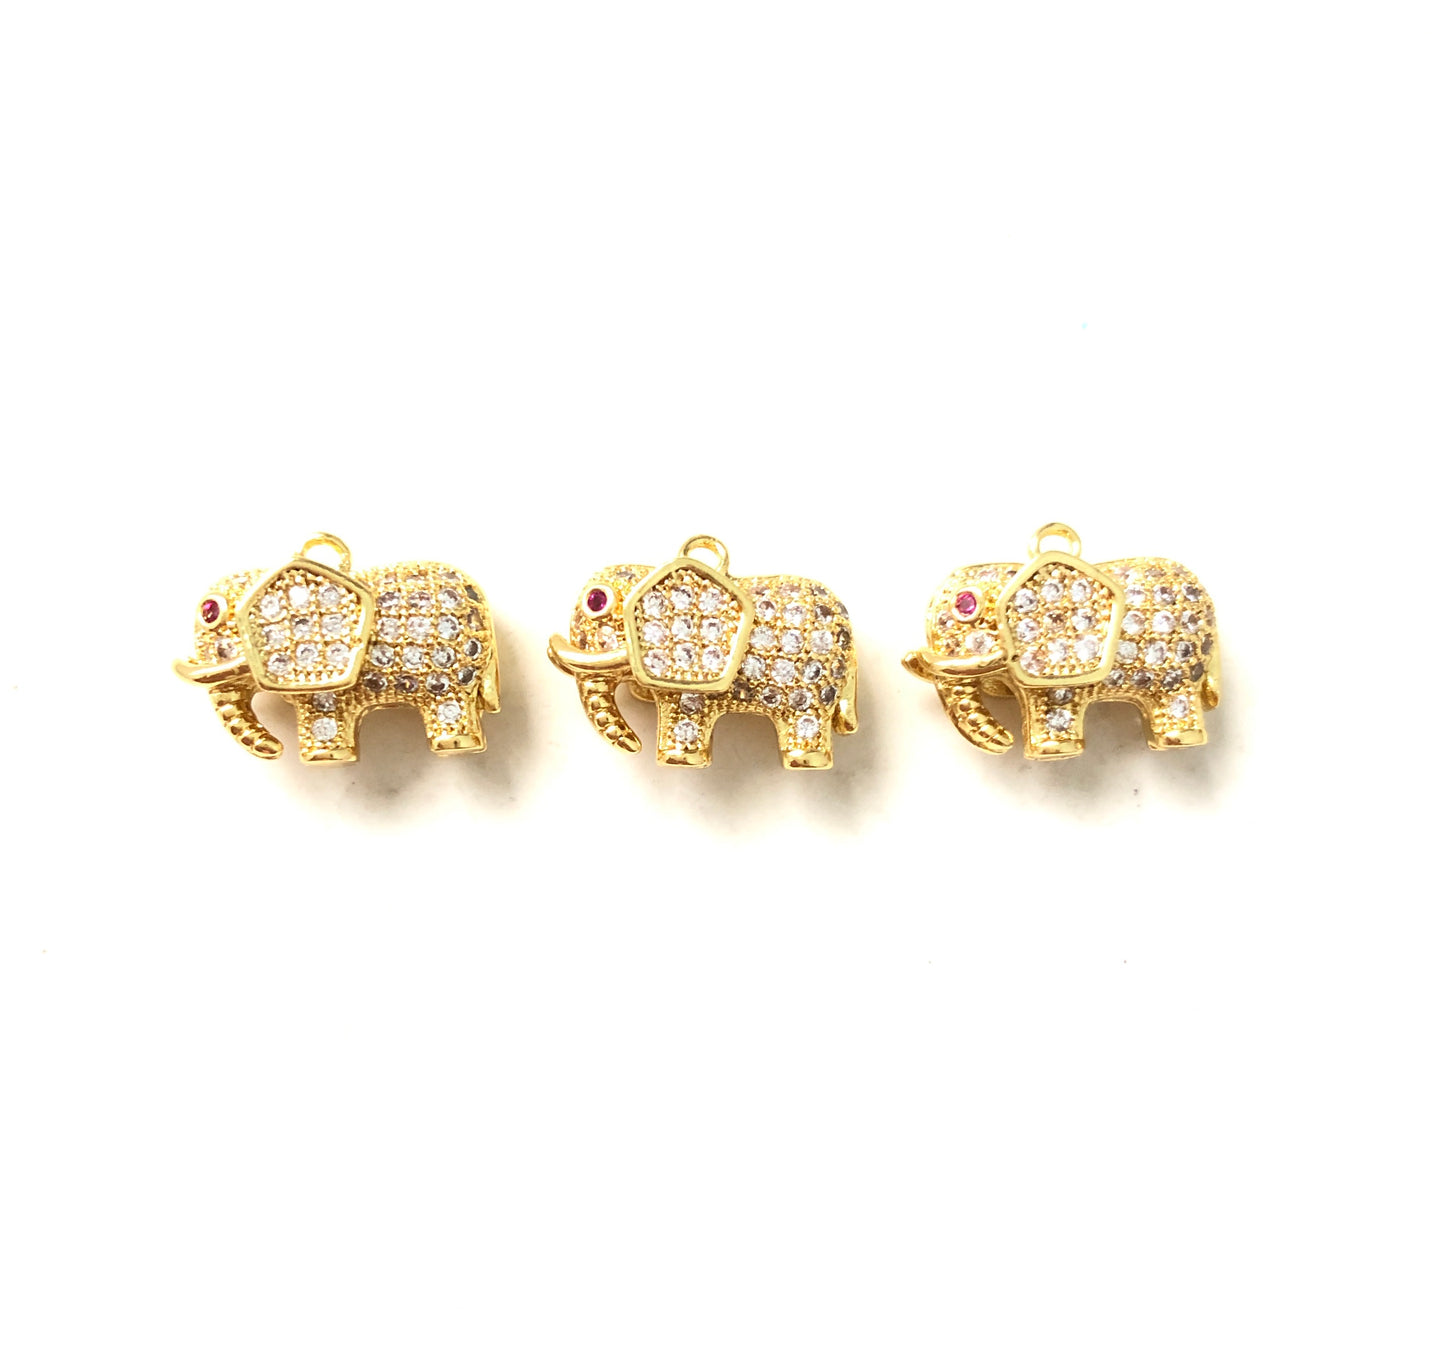 10pcs/lot 15*9mm CZ Paved Elephant Charms Gold CZ Paved Charms Animals & Insects Small Sizes Charms Beads Beyond